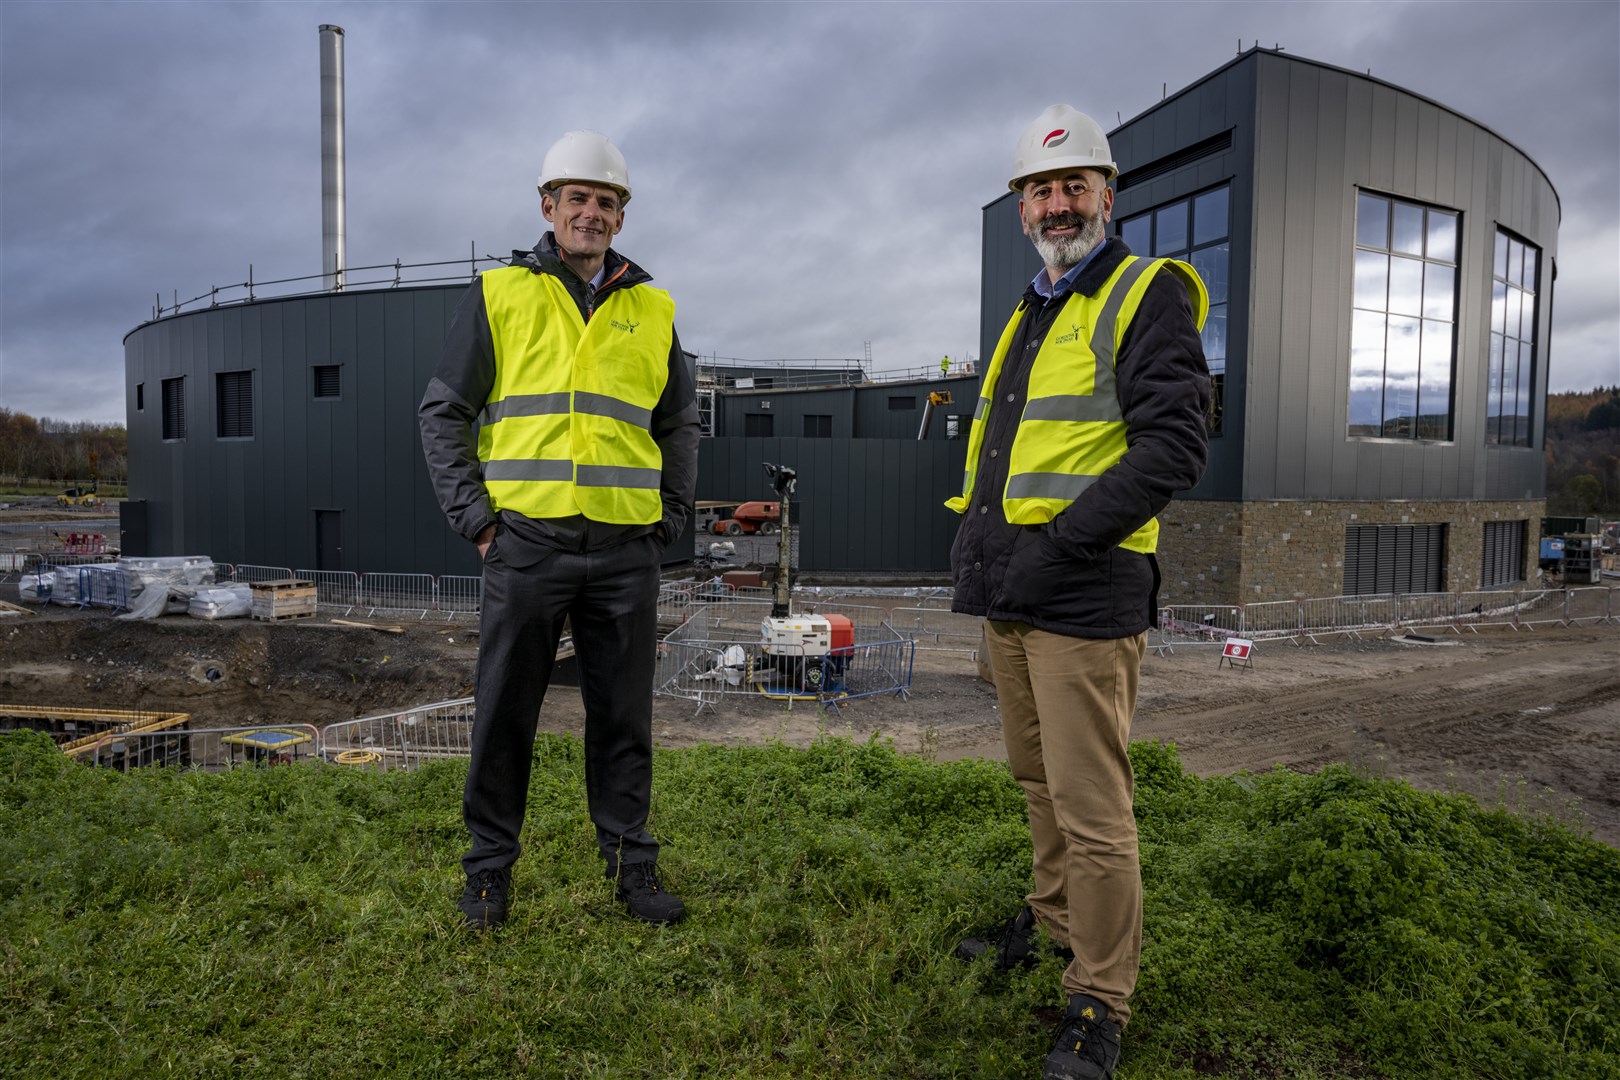 Gordon & MacPhail finance director Ben Cookman (left) and managing director Ewen Mackintosh at The Cairn Distillery being built at Grantown-on-Spey. Picture: John Paul.